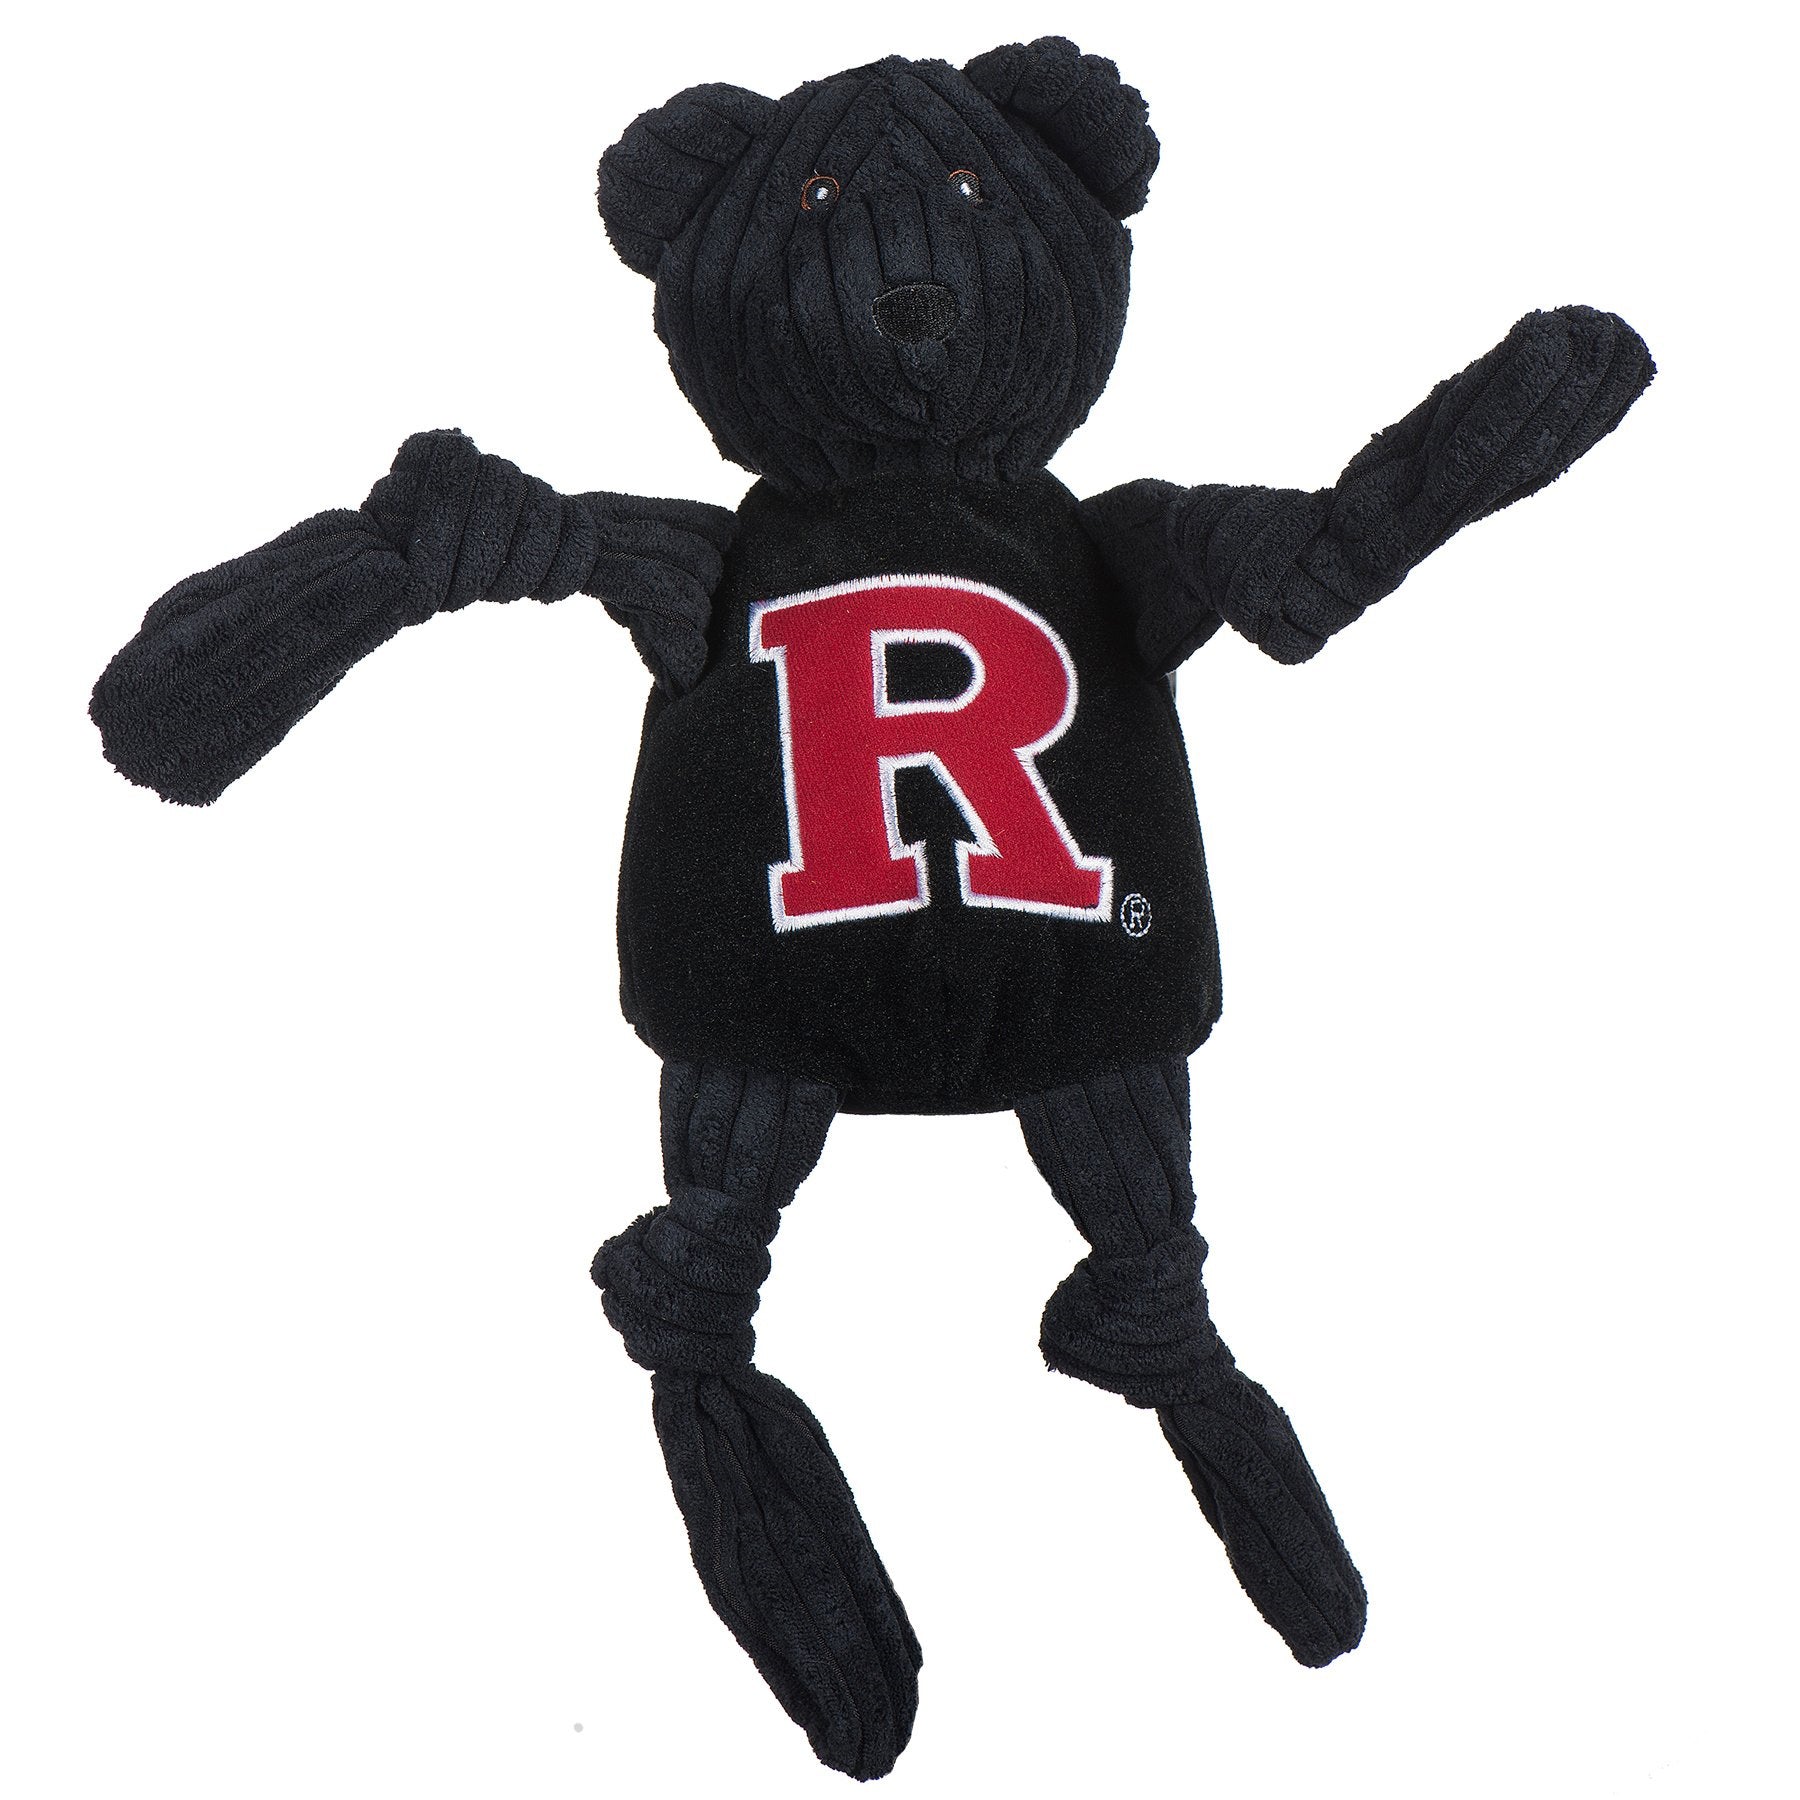 HuggleHounds Knottie Officially Licensed College Mascot Durable Squeaky Plush Dog Toy, Rutgers Scarlet Bear